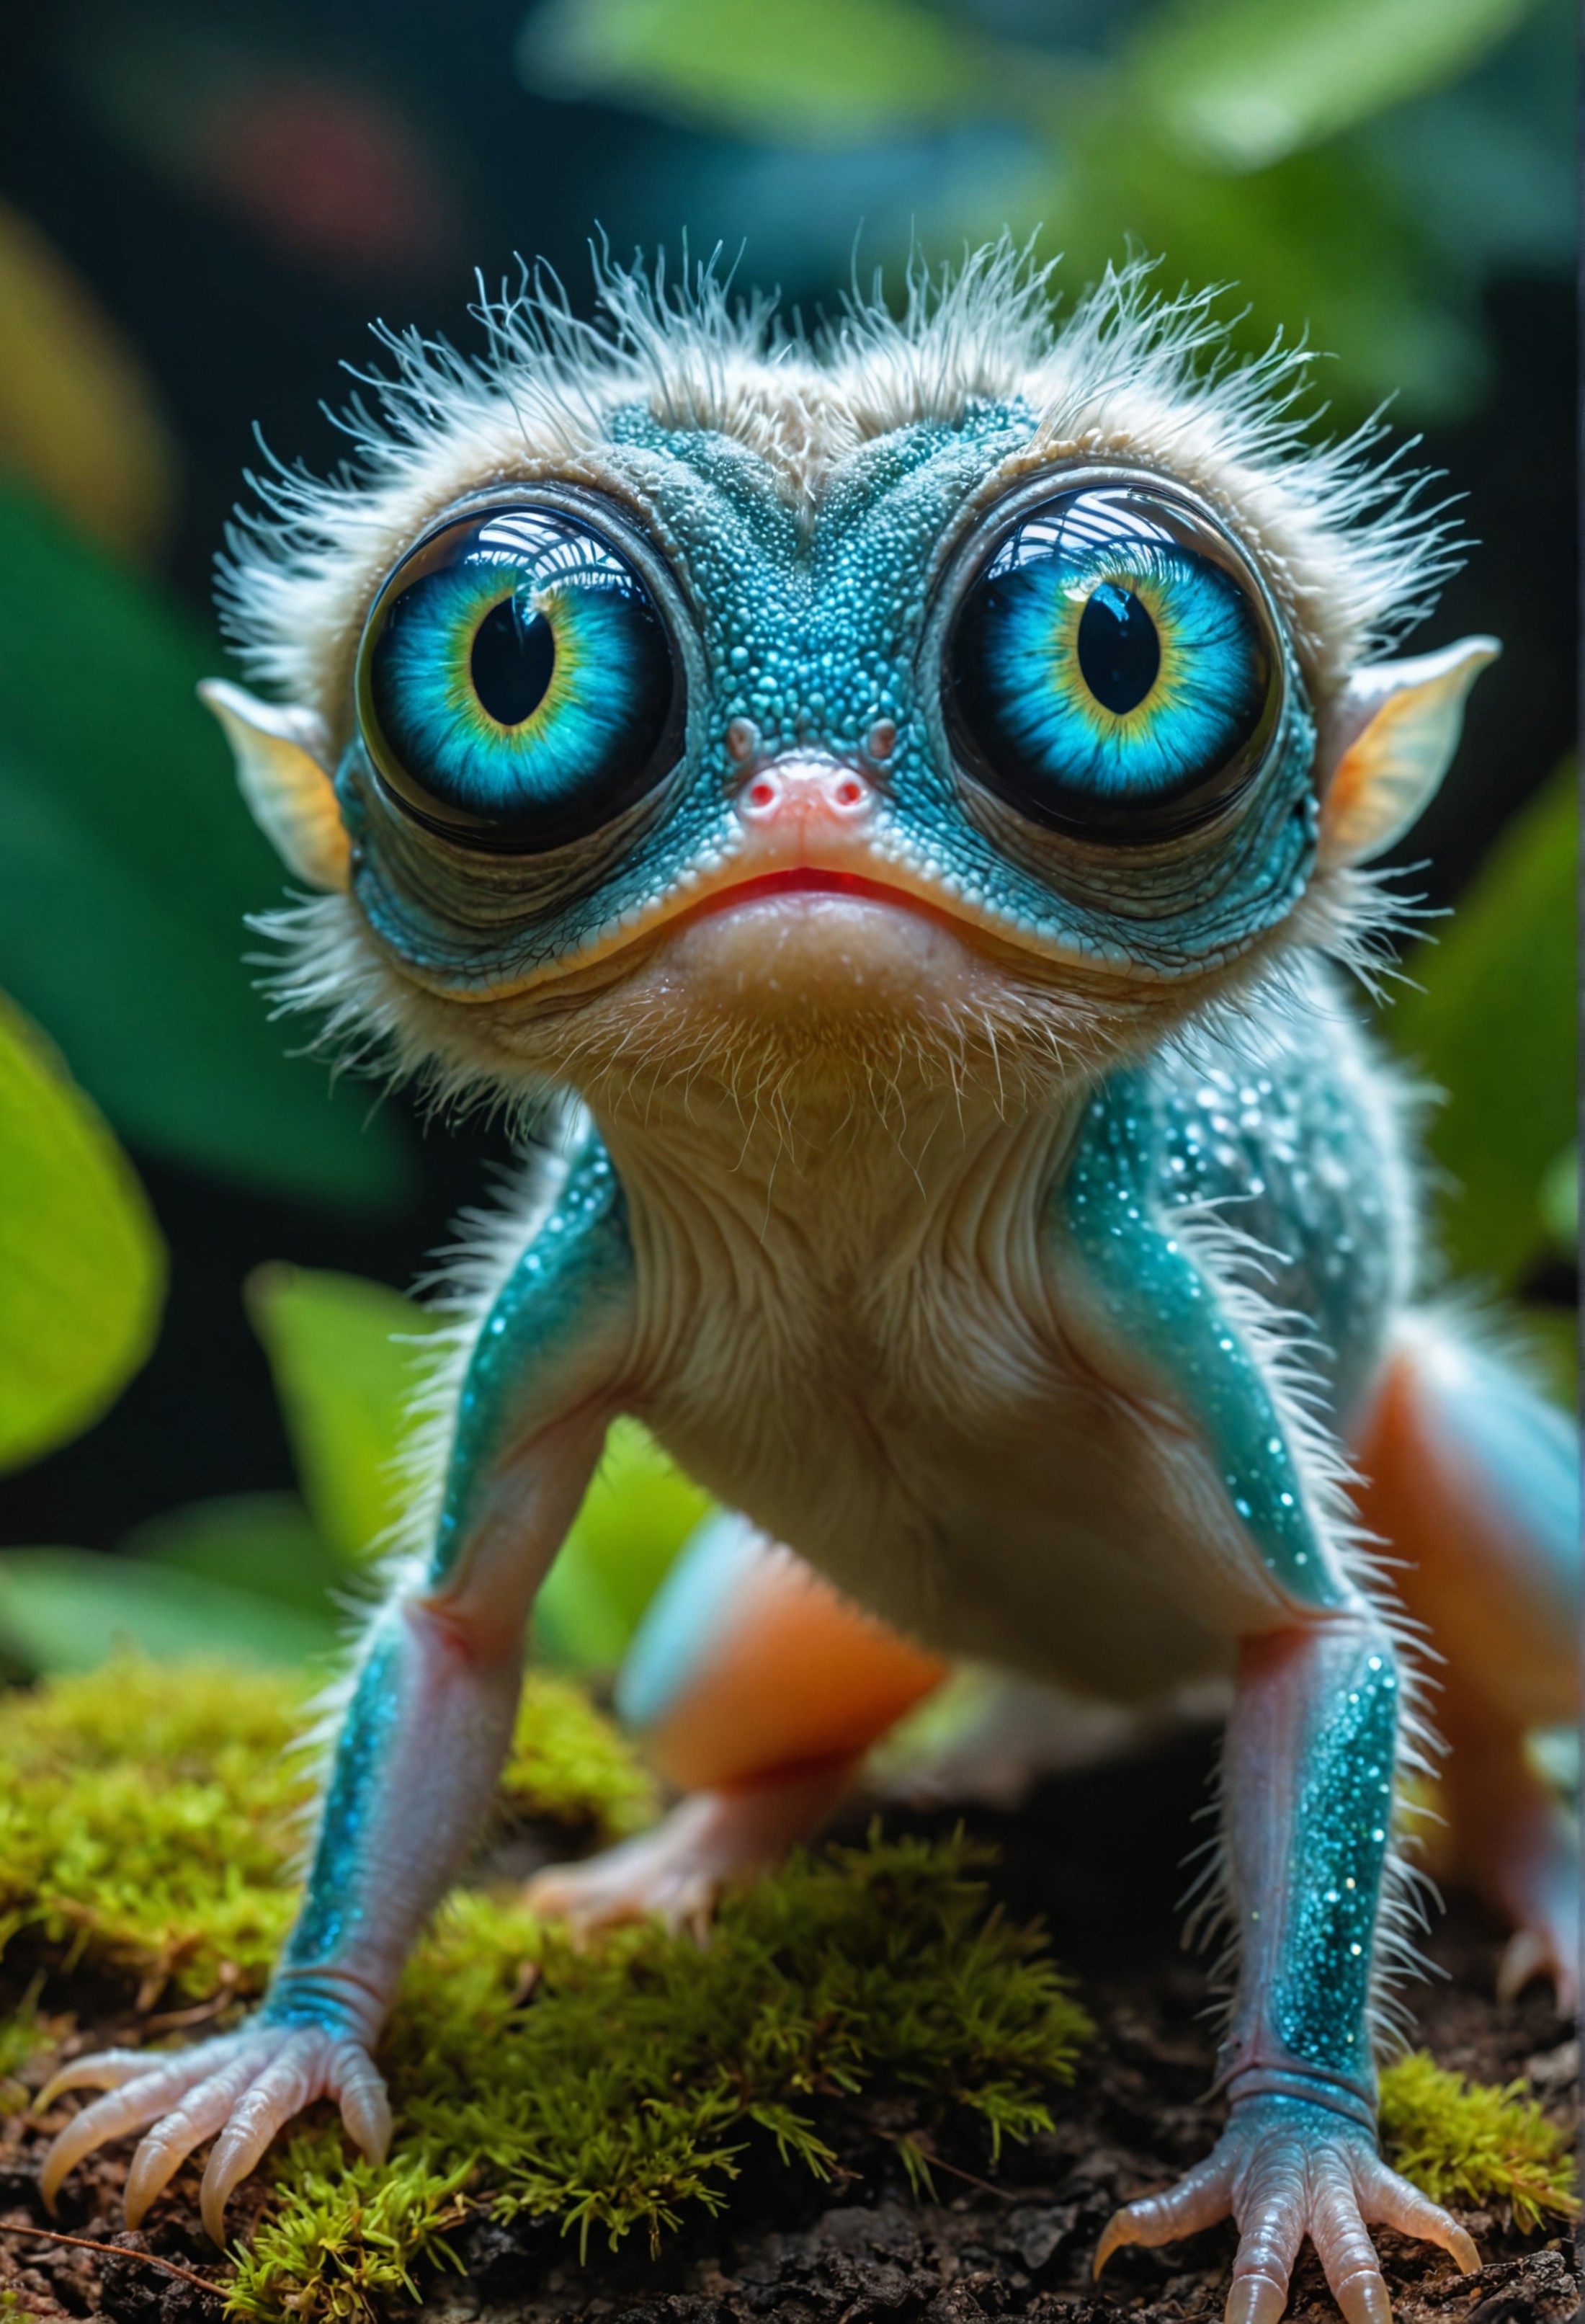 Majestic wildlife photography, astrobiology, a cute alien creature, furry, iridescent bioluminesence, giant eyes, unusual ...